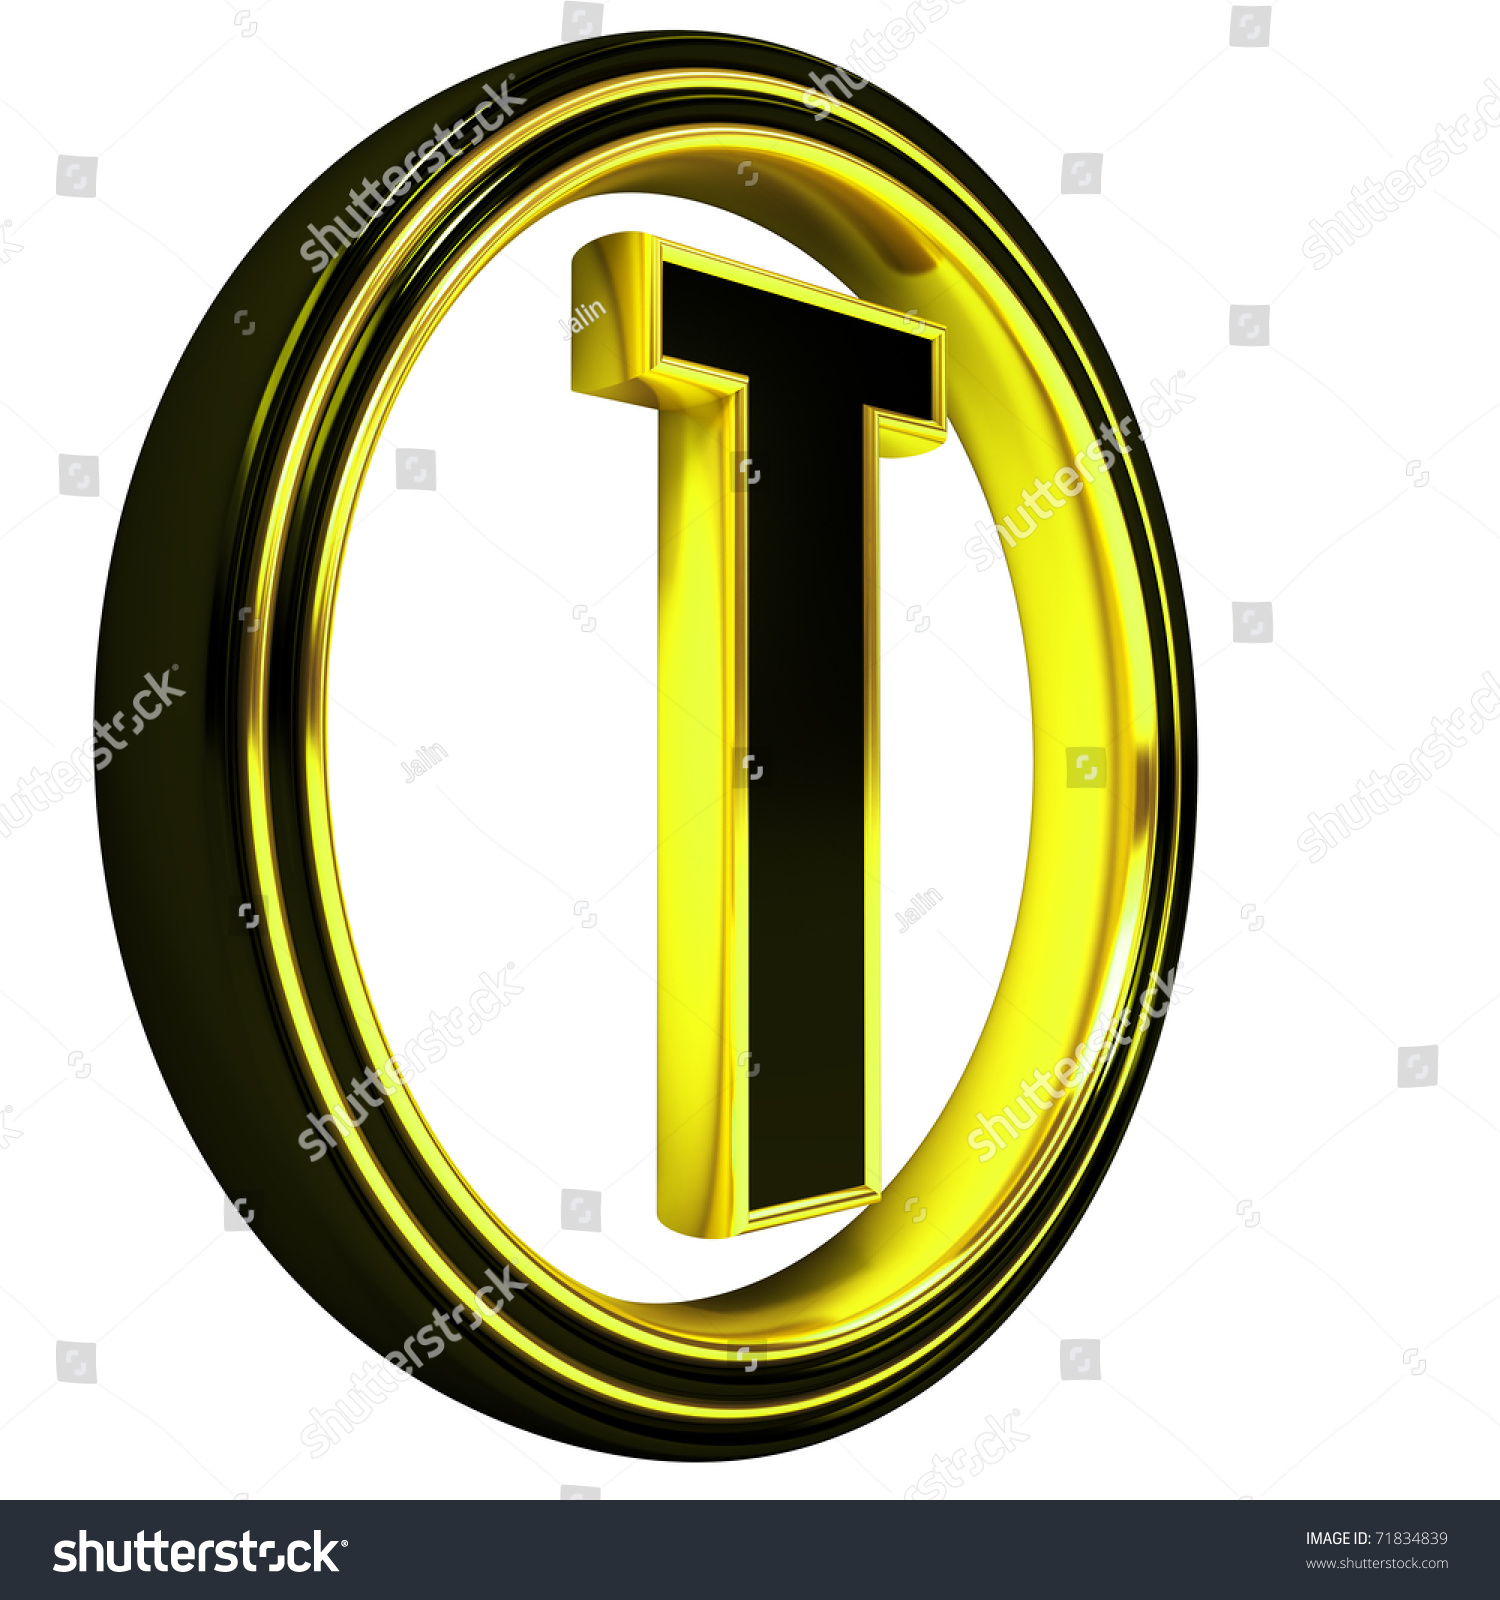 3d Letter T In Circle. Black Gold Metal Stock Photo 71834839 : Shutterstock